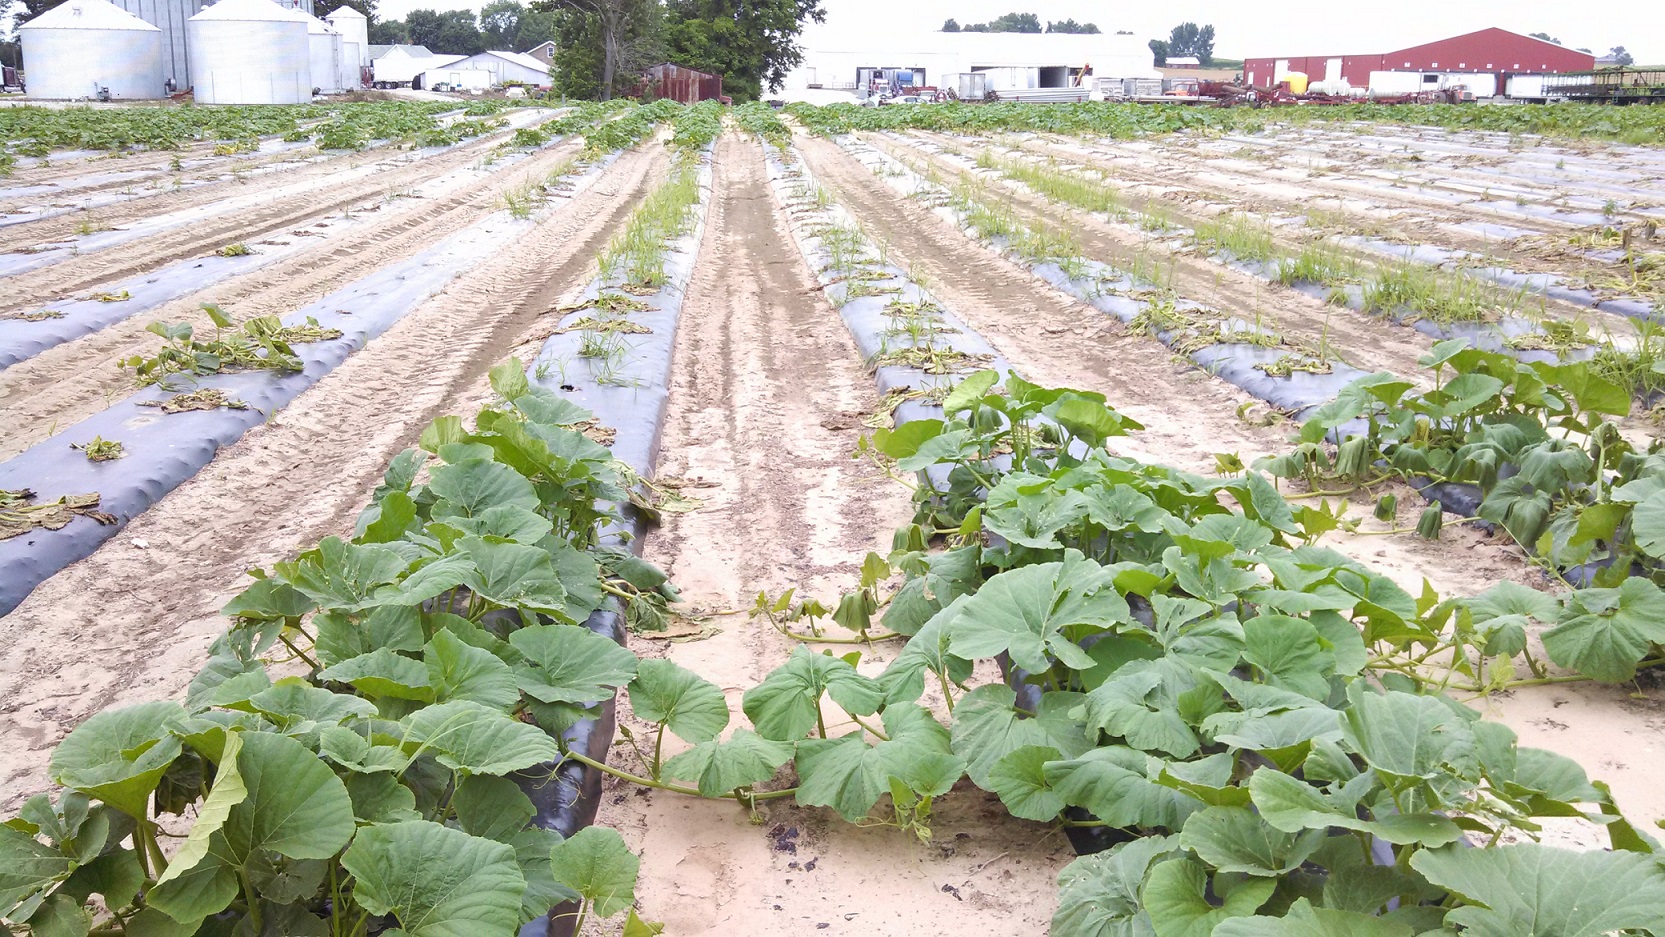 Figure 10. Phytophthora blight has affected the pumpkin plants in the lower area of this field.  Note the wilted and dead plants in the low area shown here.  